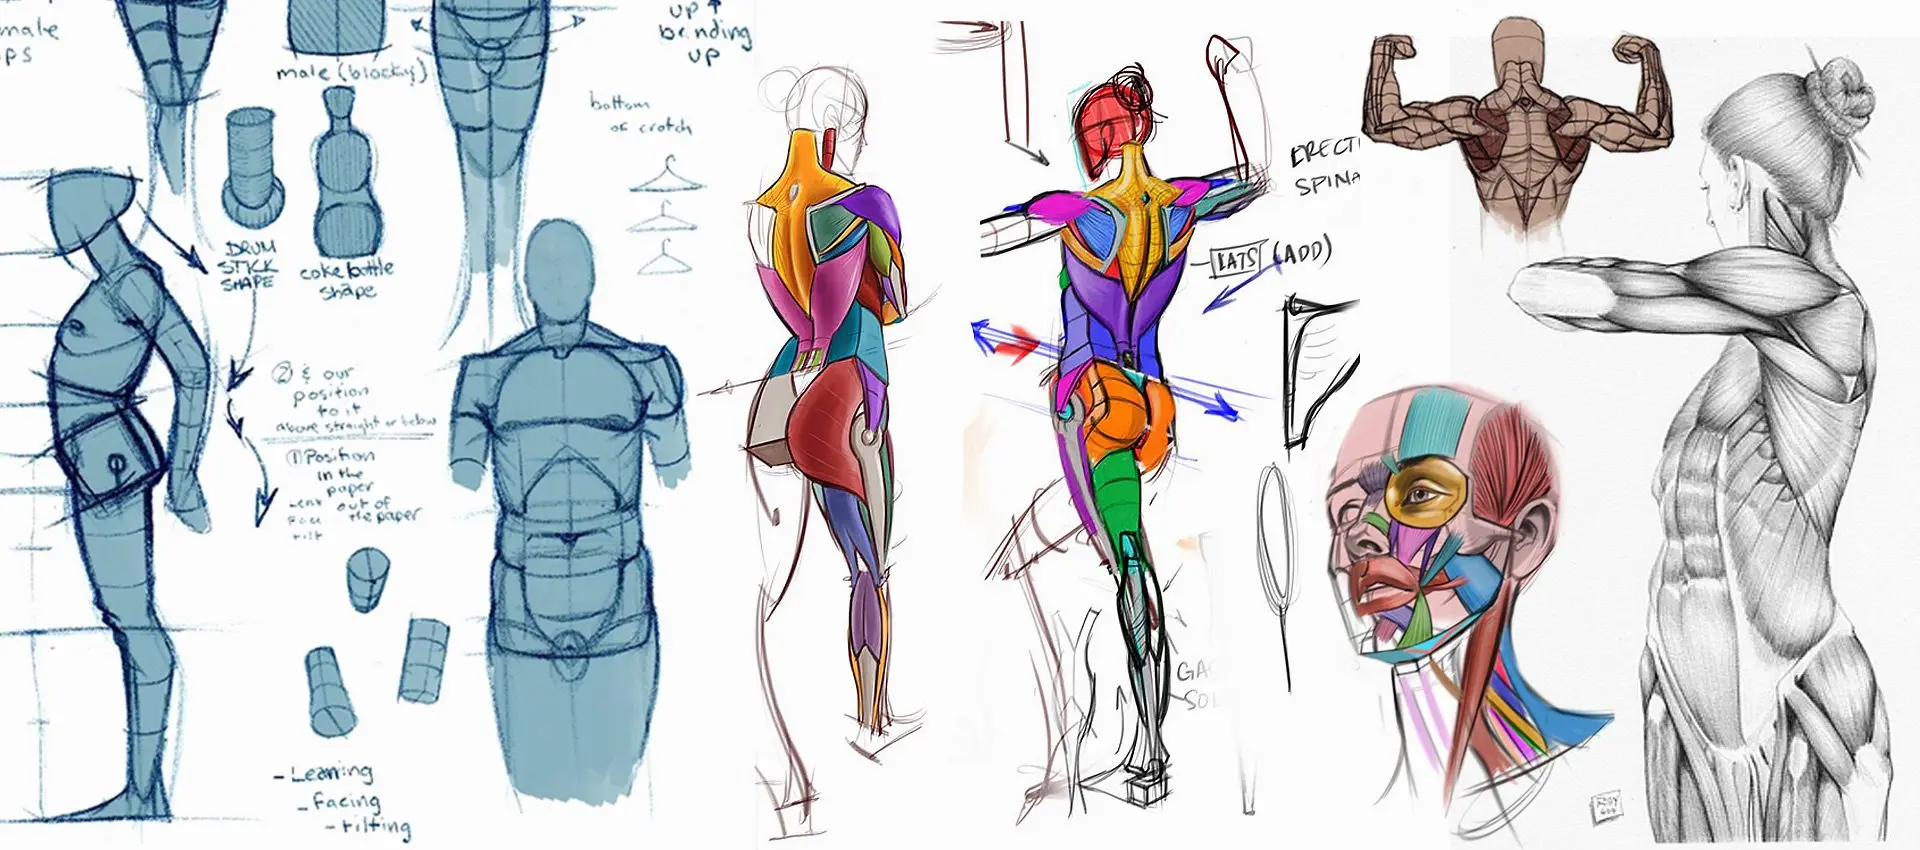 CGMA - Michael Hampton - Analytical Figure Drawing (Parts 1 and 2)